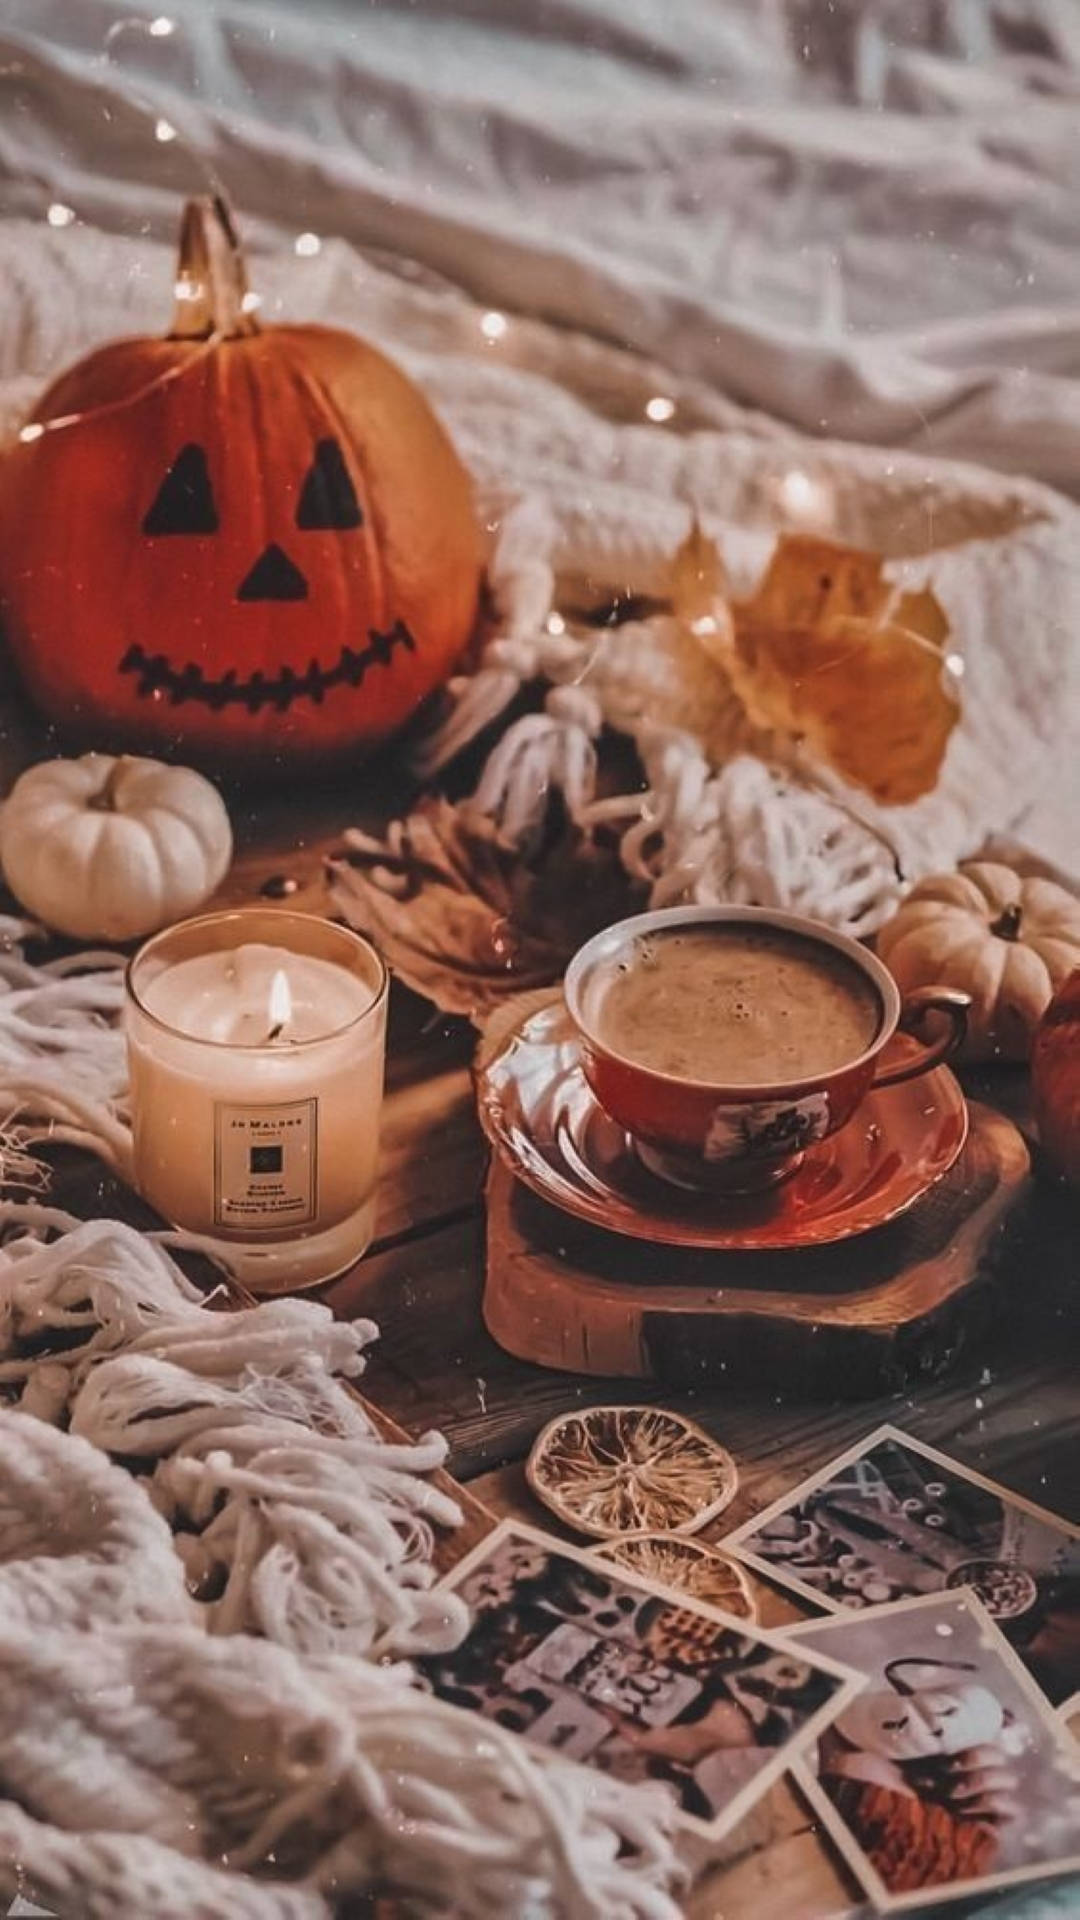 Spooky Halloween Flat Lay Aesthetic with Classic Festive Elements Wallpaper